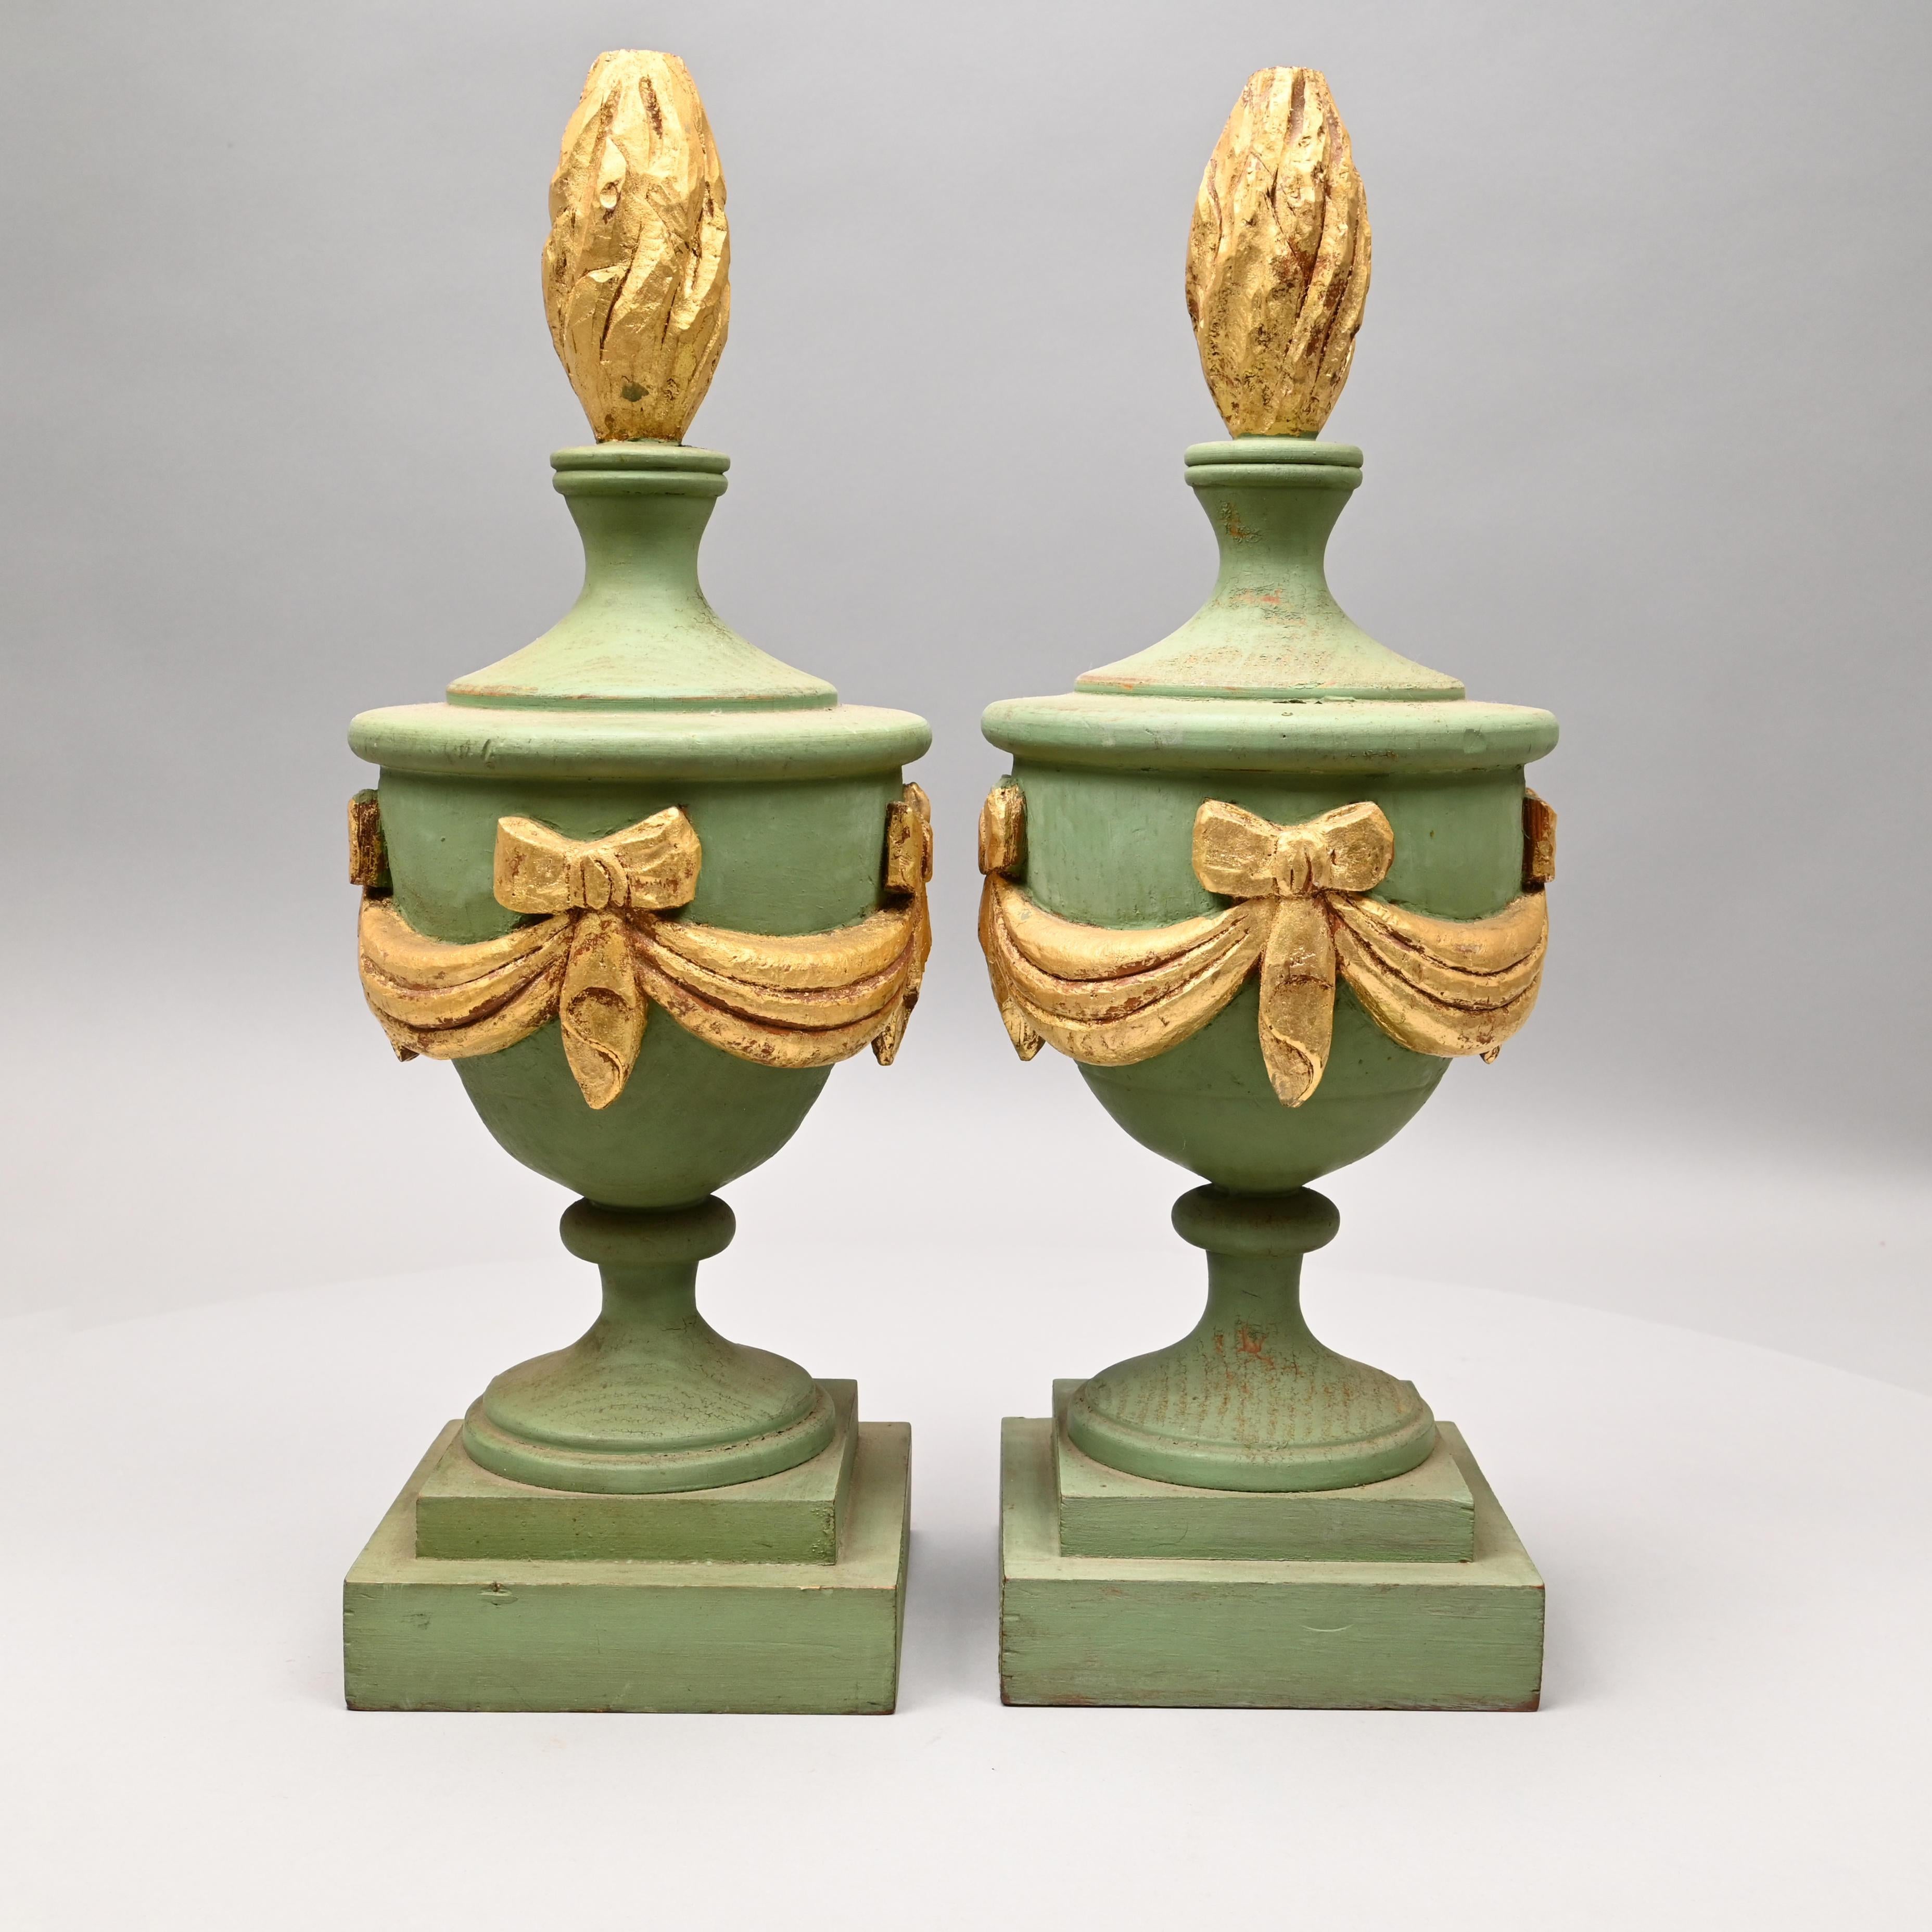 American Decorative Pair of Wooden Light Green and Gold Painted Architectural Finials For Sale